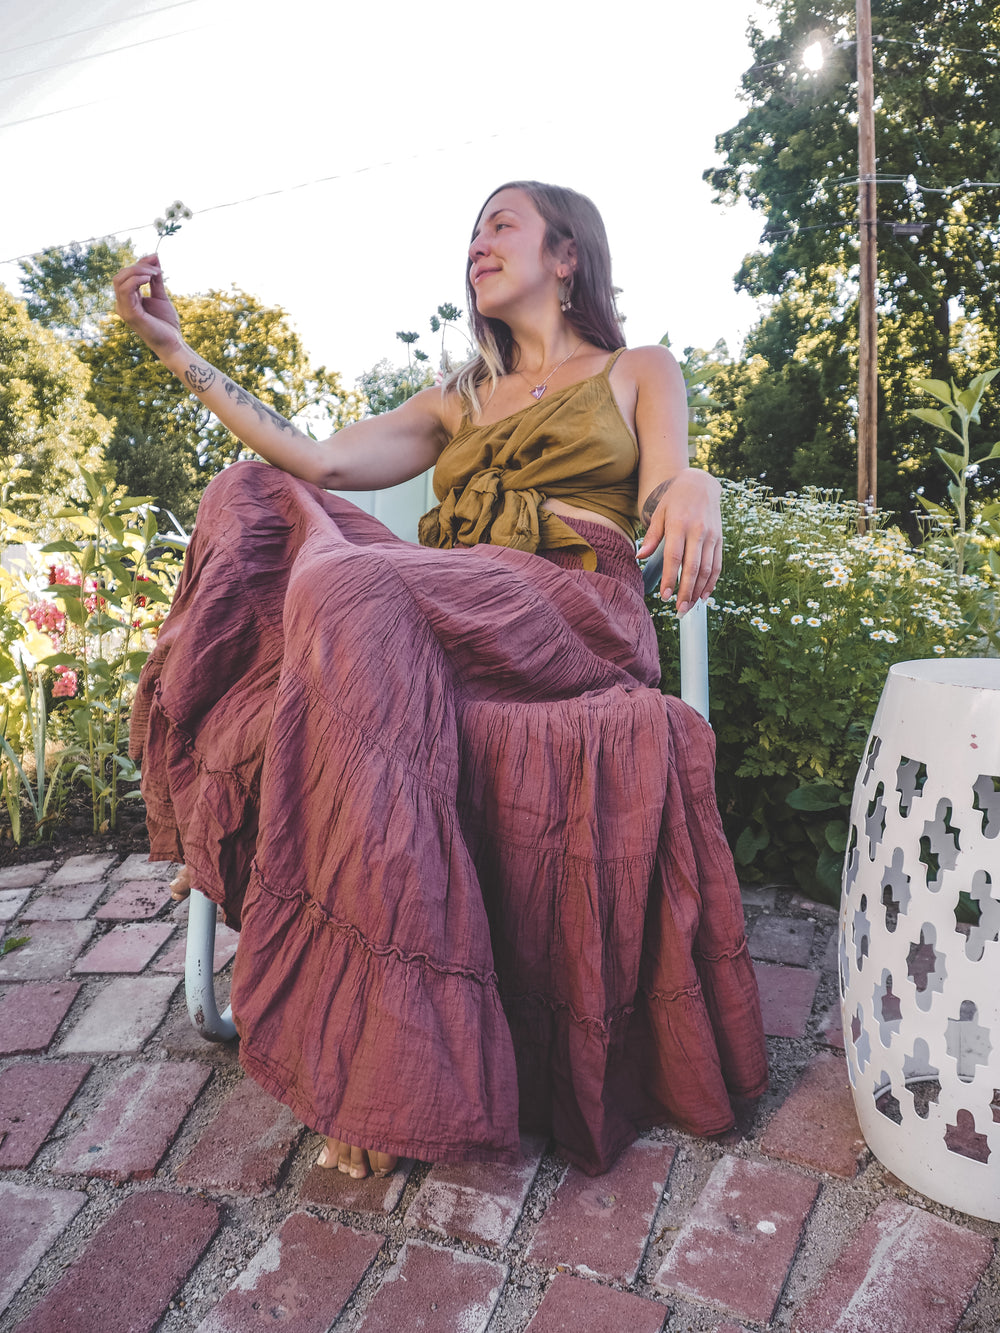 Woman sits in outside garden in a chair admiring a flower in her right hand. She is dressed in a gold-color tank top and purple maxi skirt.